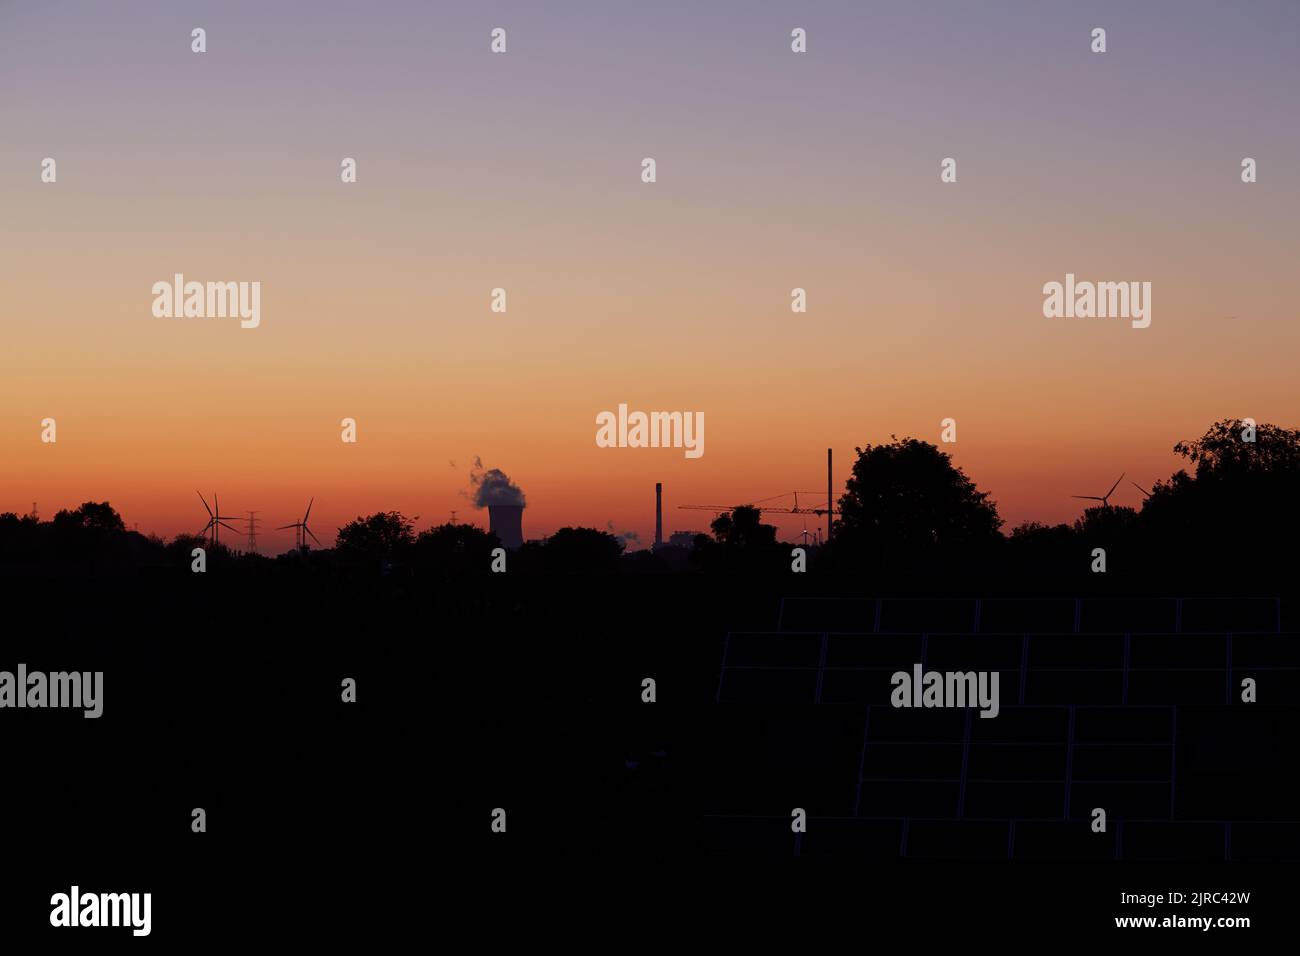 Power plant in silhouette image at sunset Stock Photo